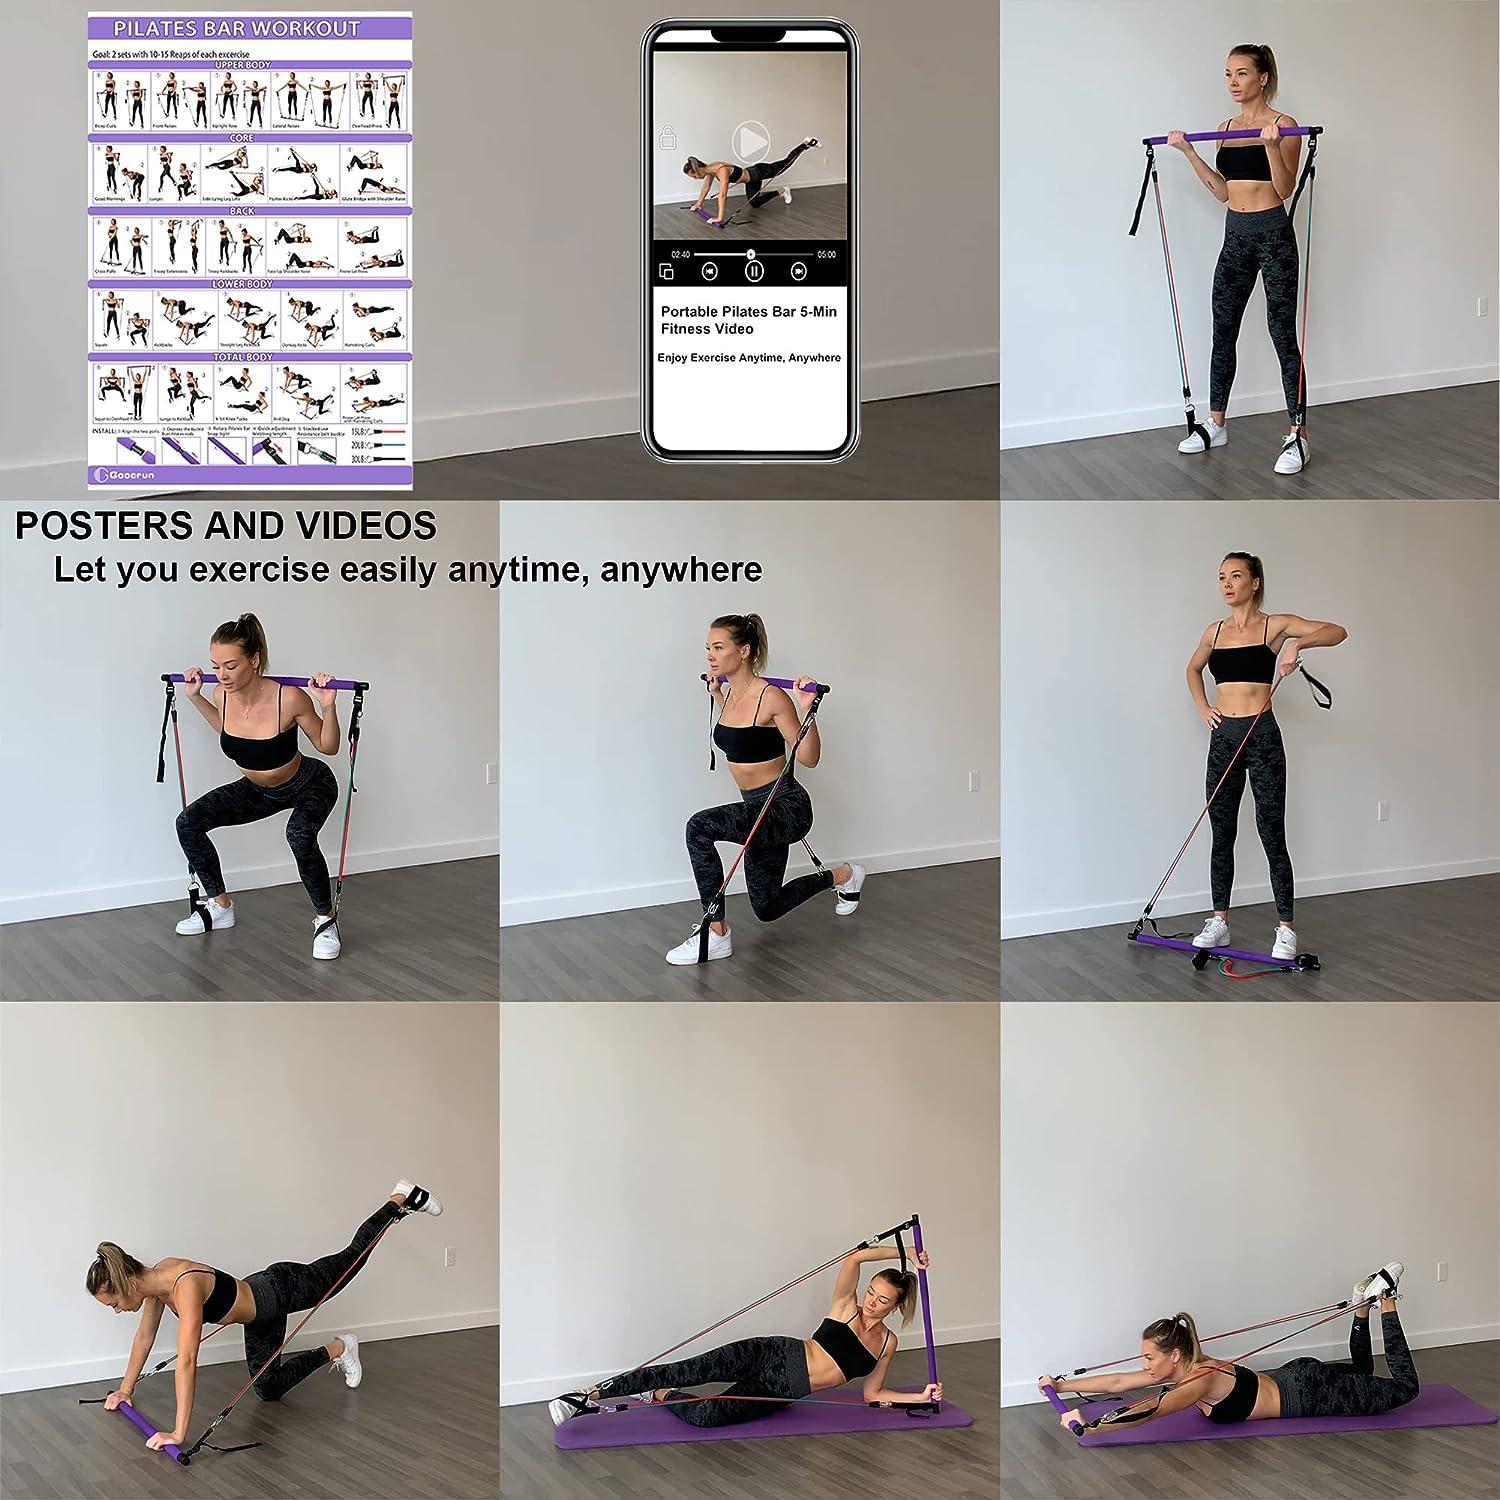 Pilates Bar Kit with Resistance Bands - Workout Equipment for Home Workouts  - Pilates Stick - Resistance Kit - Leg